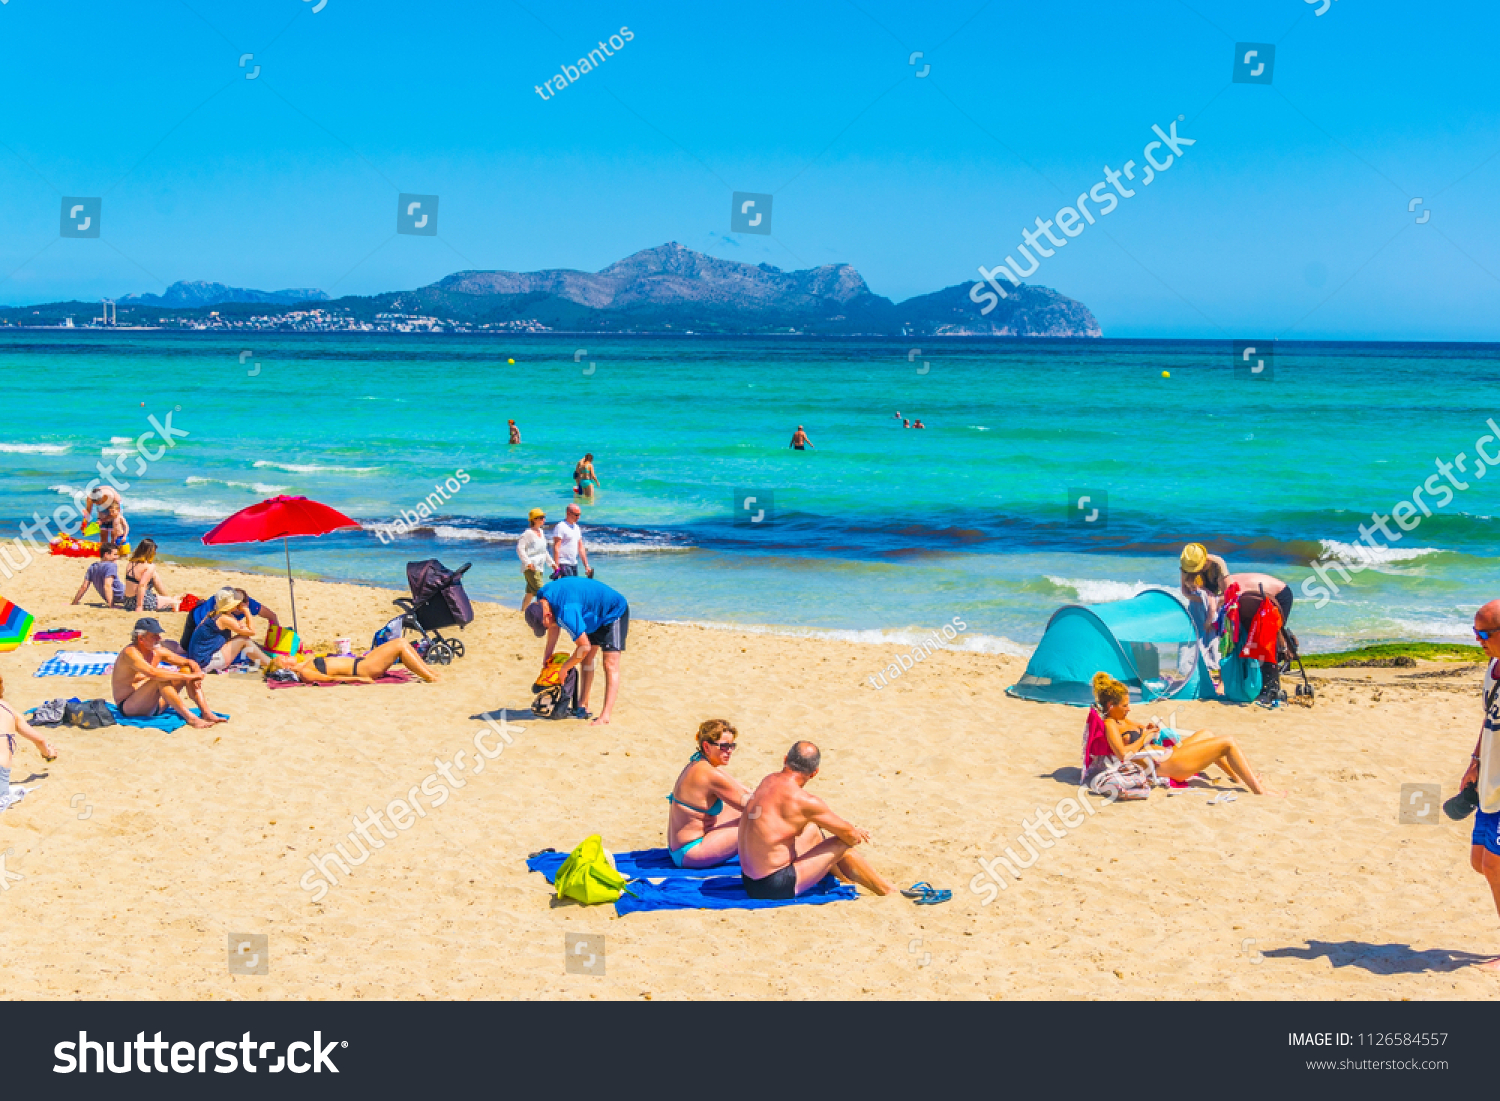 Can Picafort Spain May 23 2017 Stock Photo Edit Now 1126584557